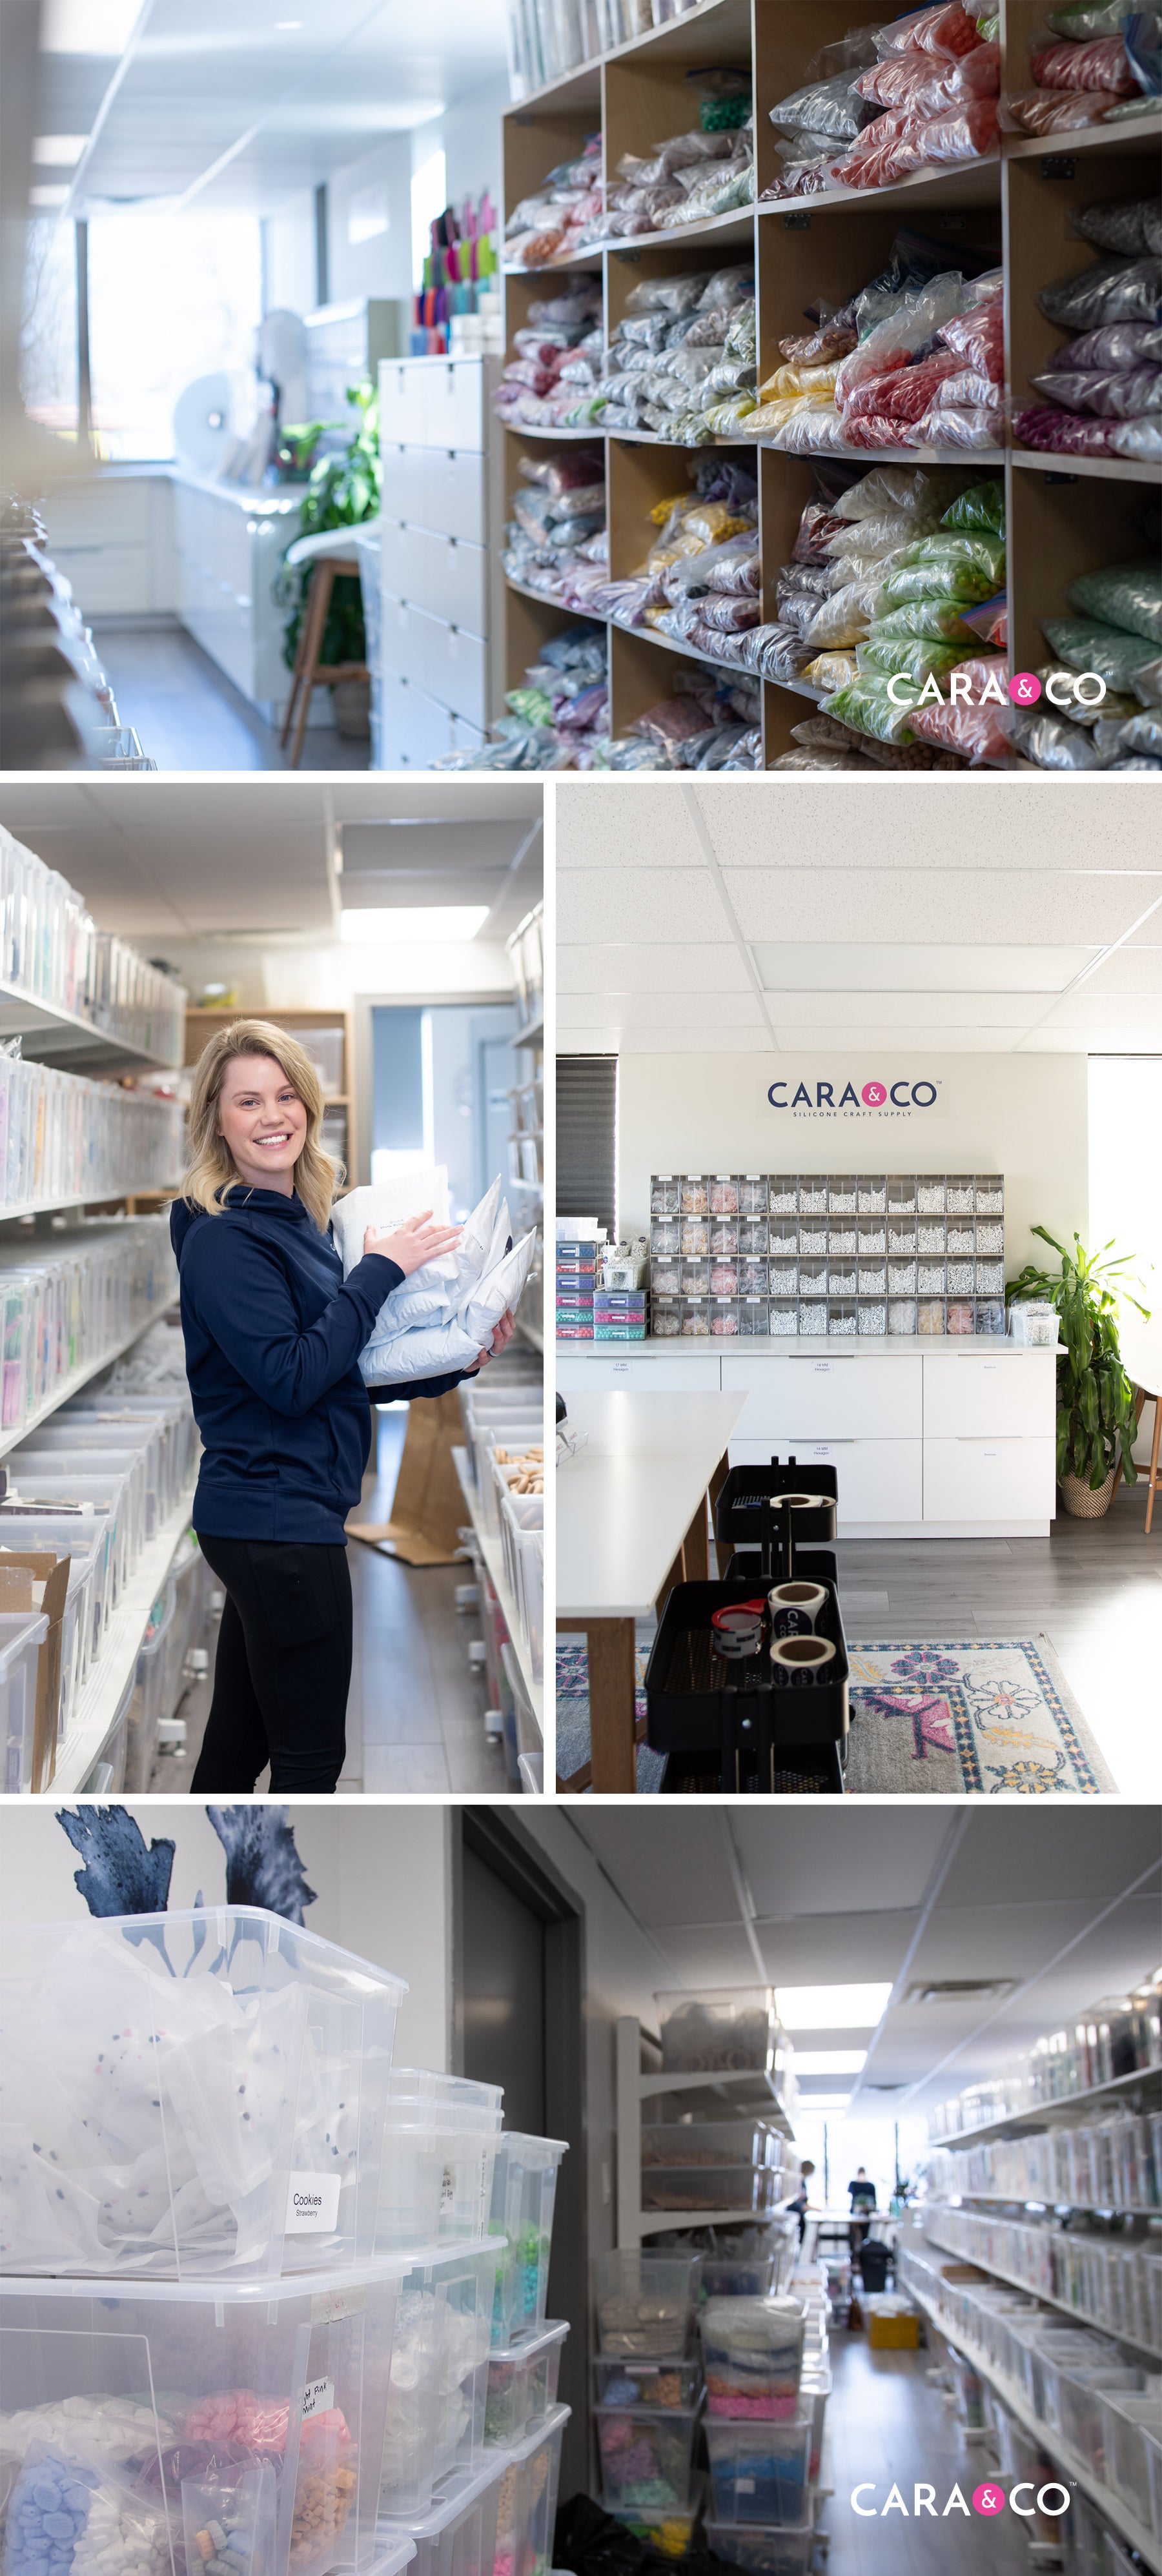 Our Big Move: Why, When and How we Moved Shop - Cara & Co Blog Posts